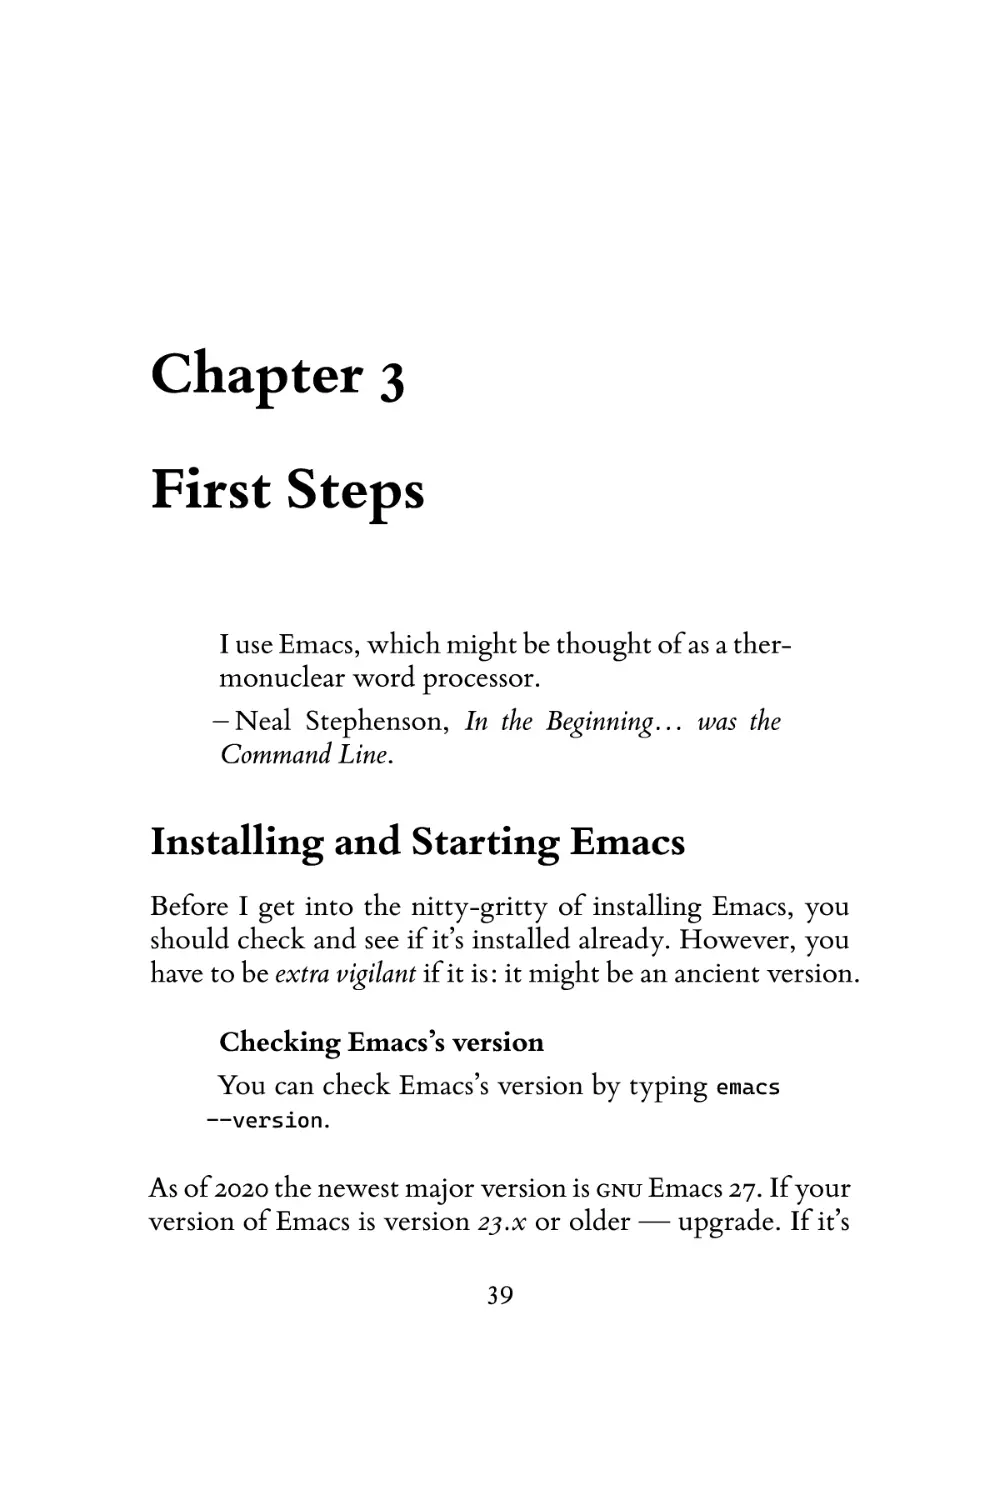 First Steps
Installing and Starting Emacs